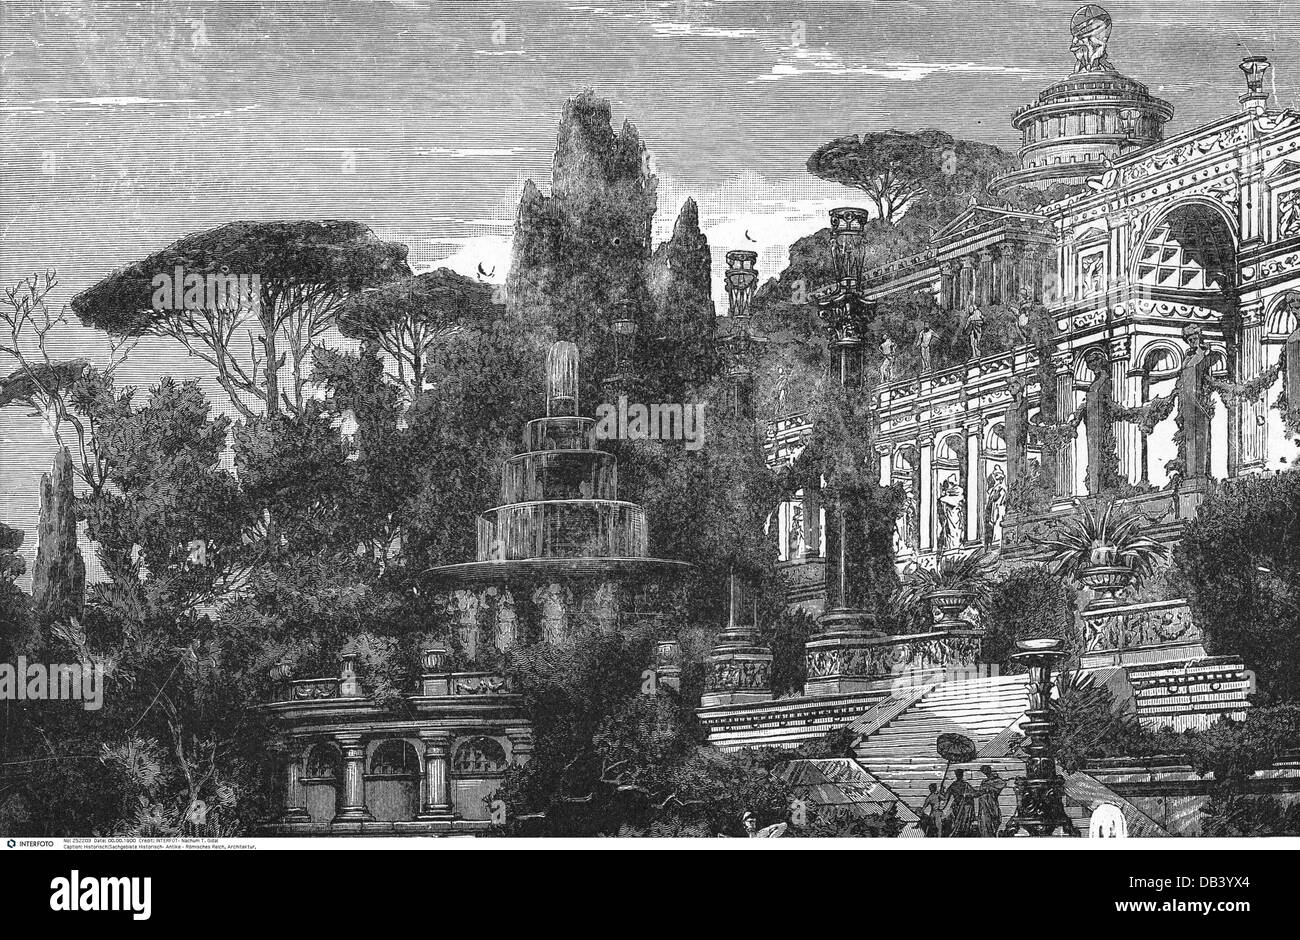 ancient world, Roman Empire, architecture, splendid Roman palace, reconstruction, wood engraving, 19th century, fountain, fountains, magnificent building, marvellous, marvelous, palace, palaces, exterior view, reconstruction, ancient world, ancient times, historic, historical, ancient world, people, Additional-Rights-Clearences-Not Available Stock Photo